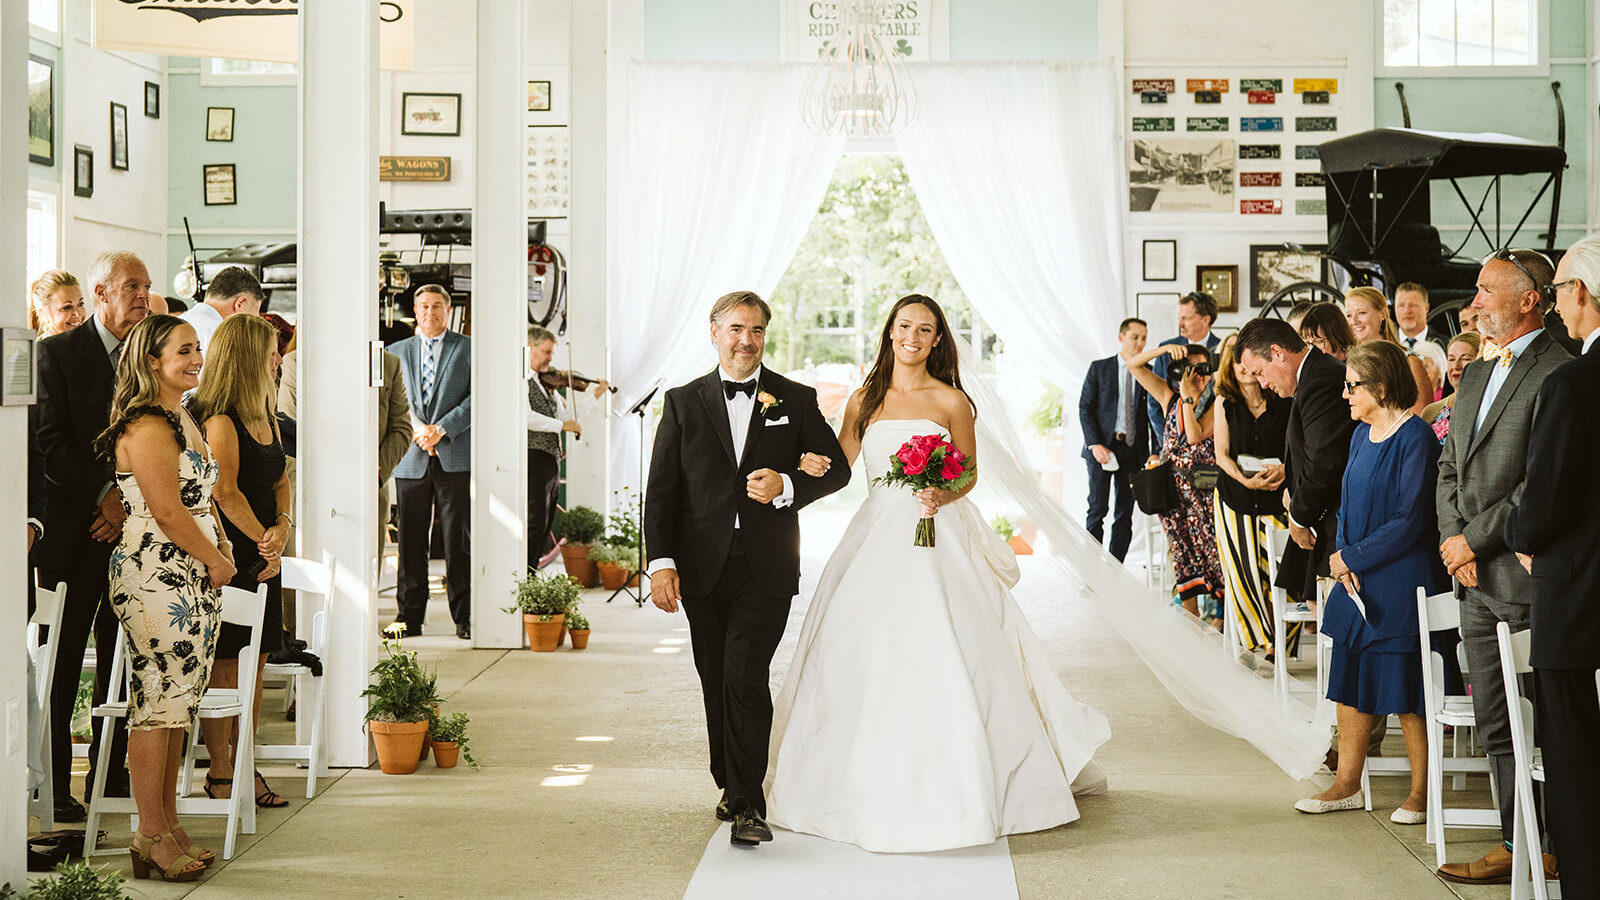 This elegant Mackinac Island wedding at the Grand Hotel was planned by Conradie Event Design.